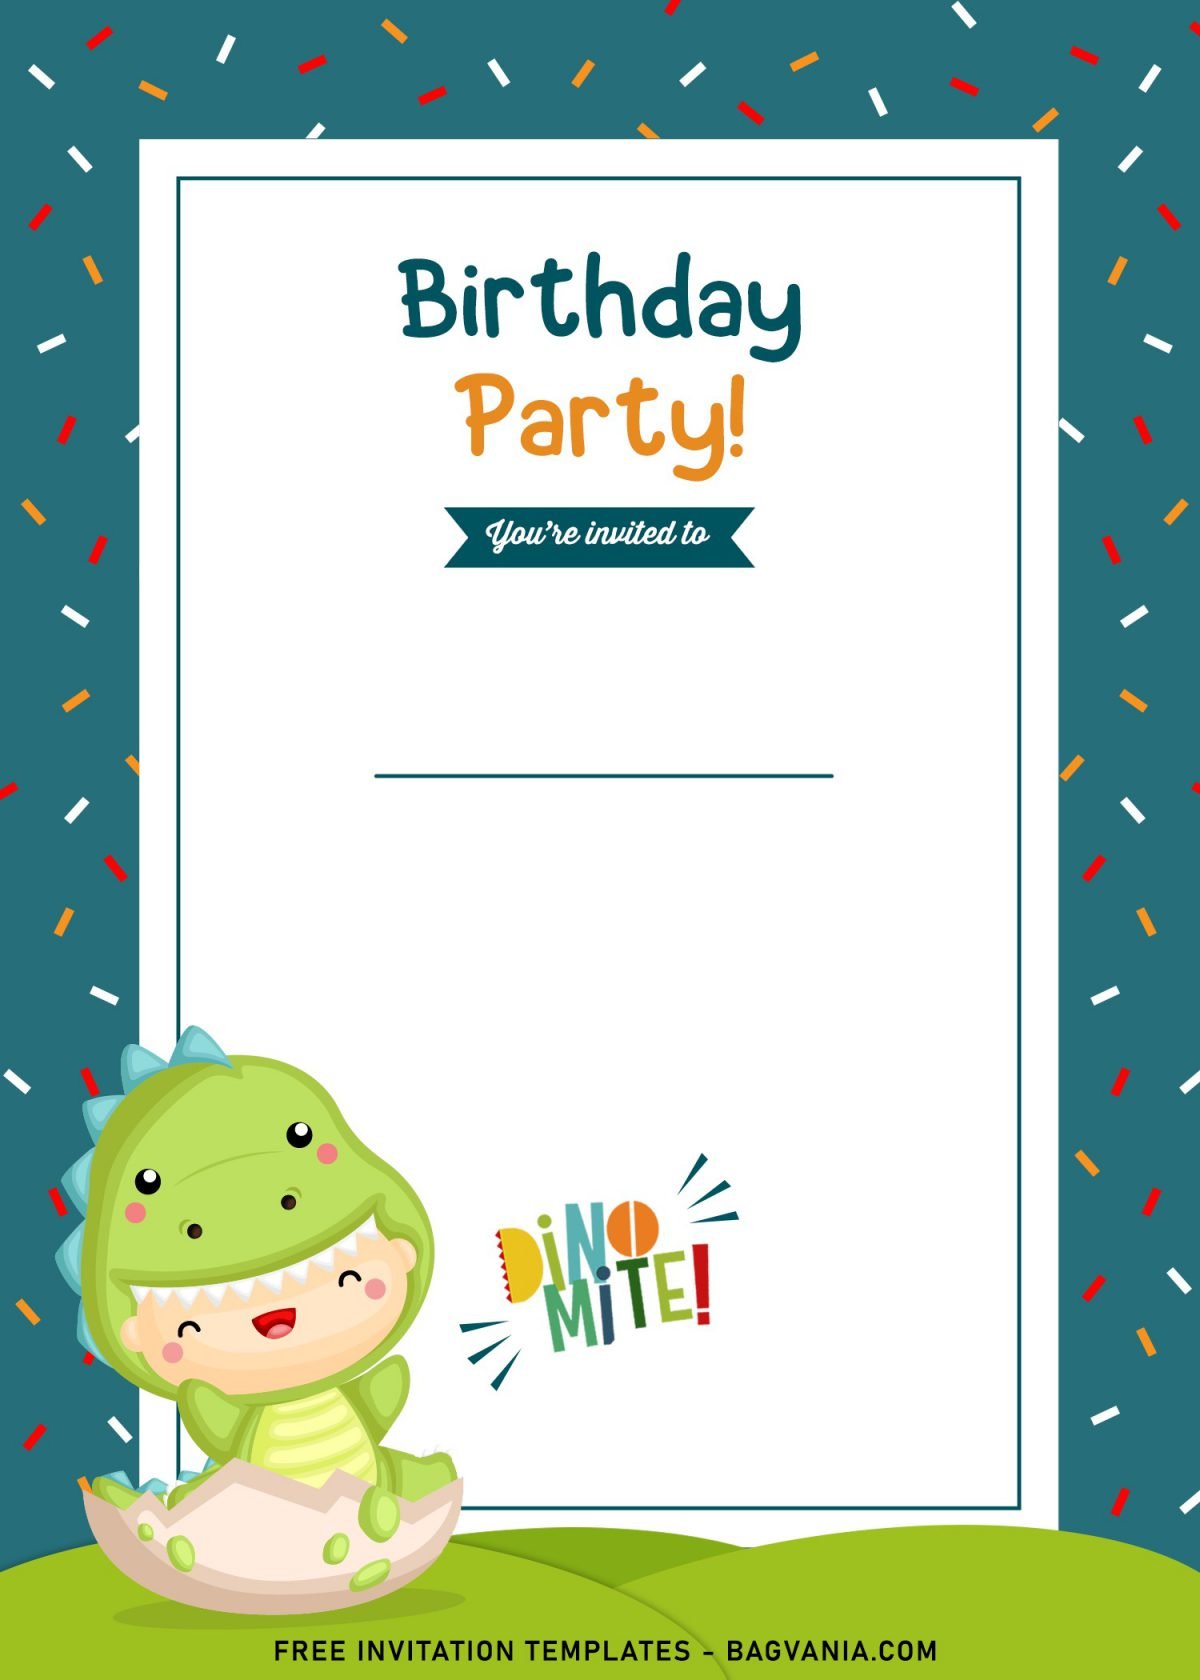 9+ Awesome Dino Party Birthday Invitation Templates and has Cute Baby in Dino outfit